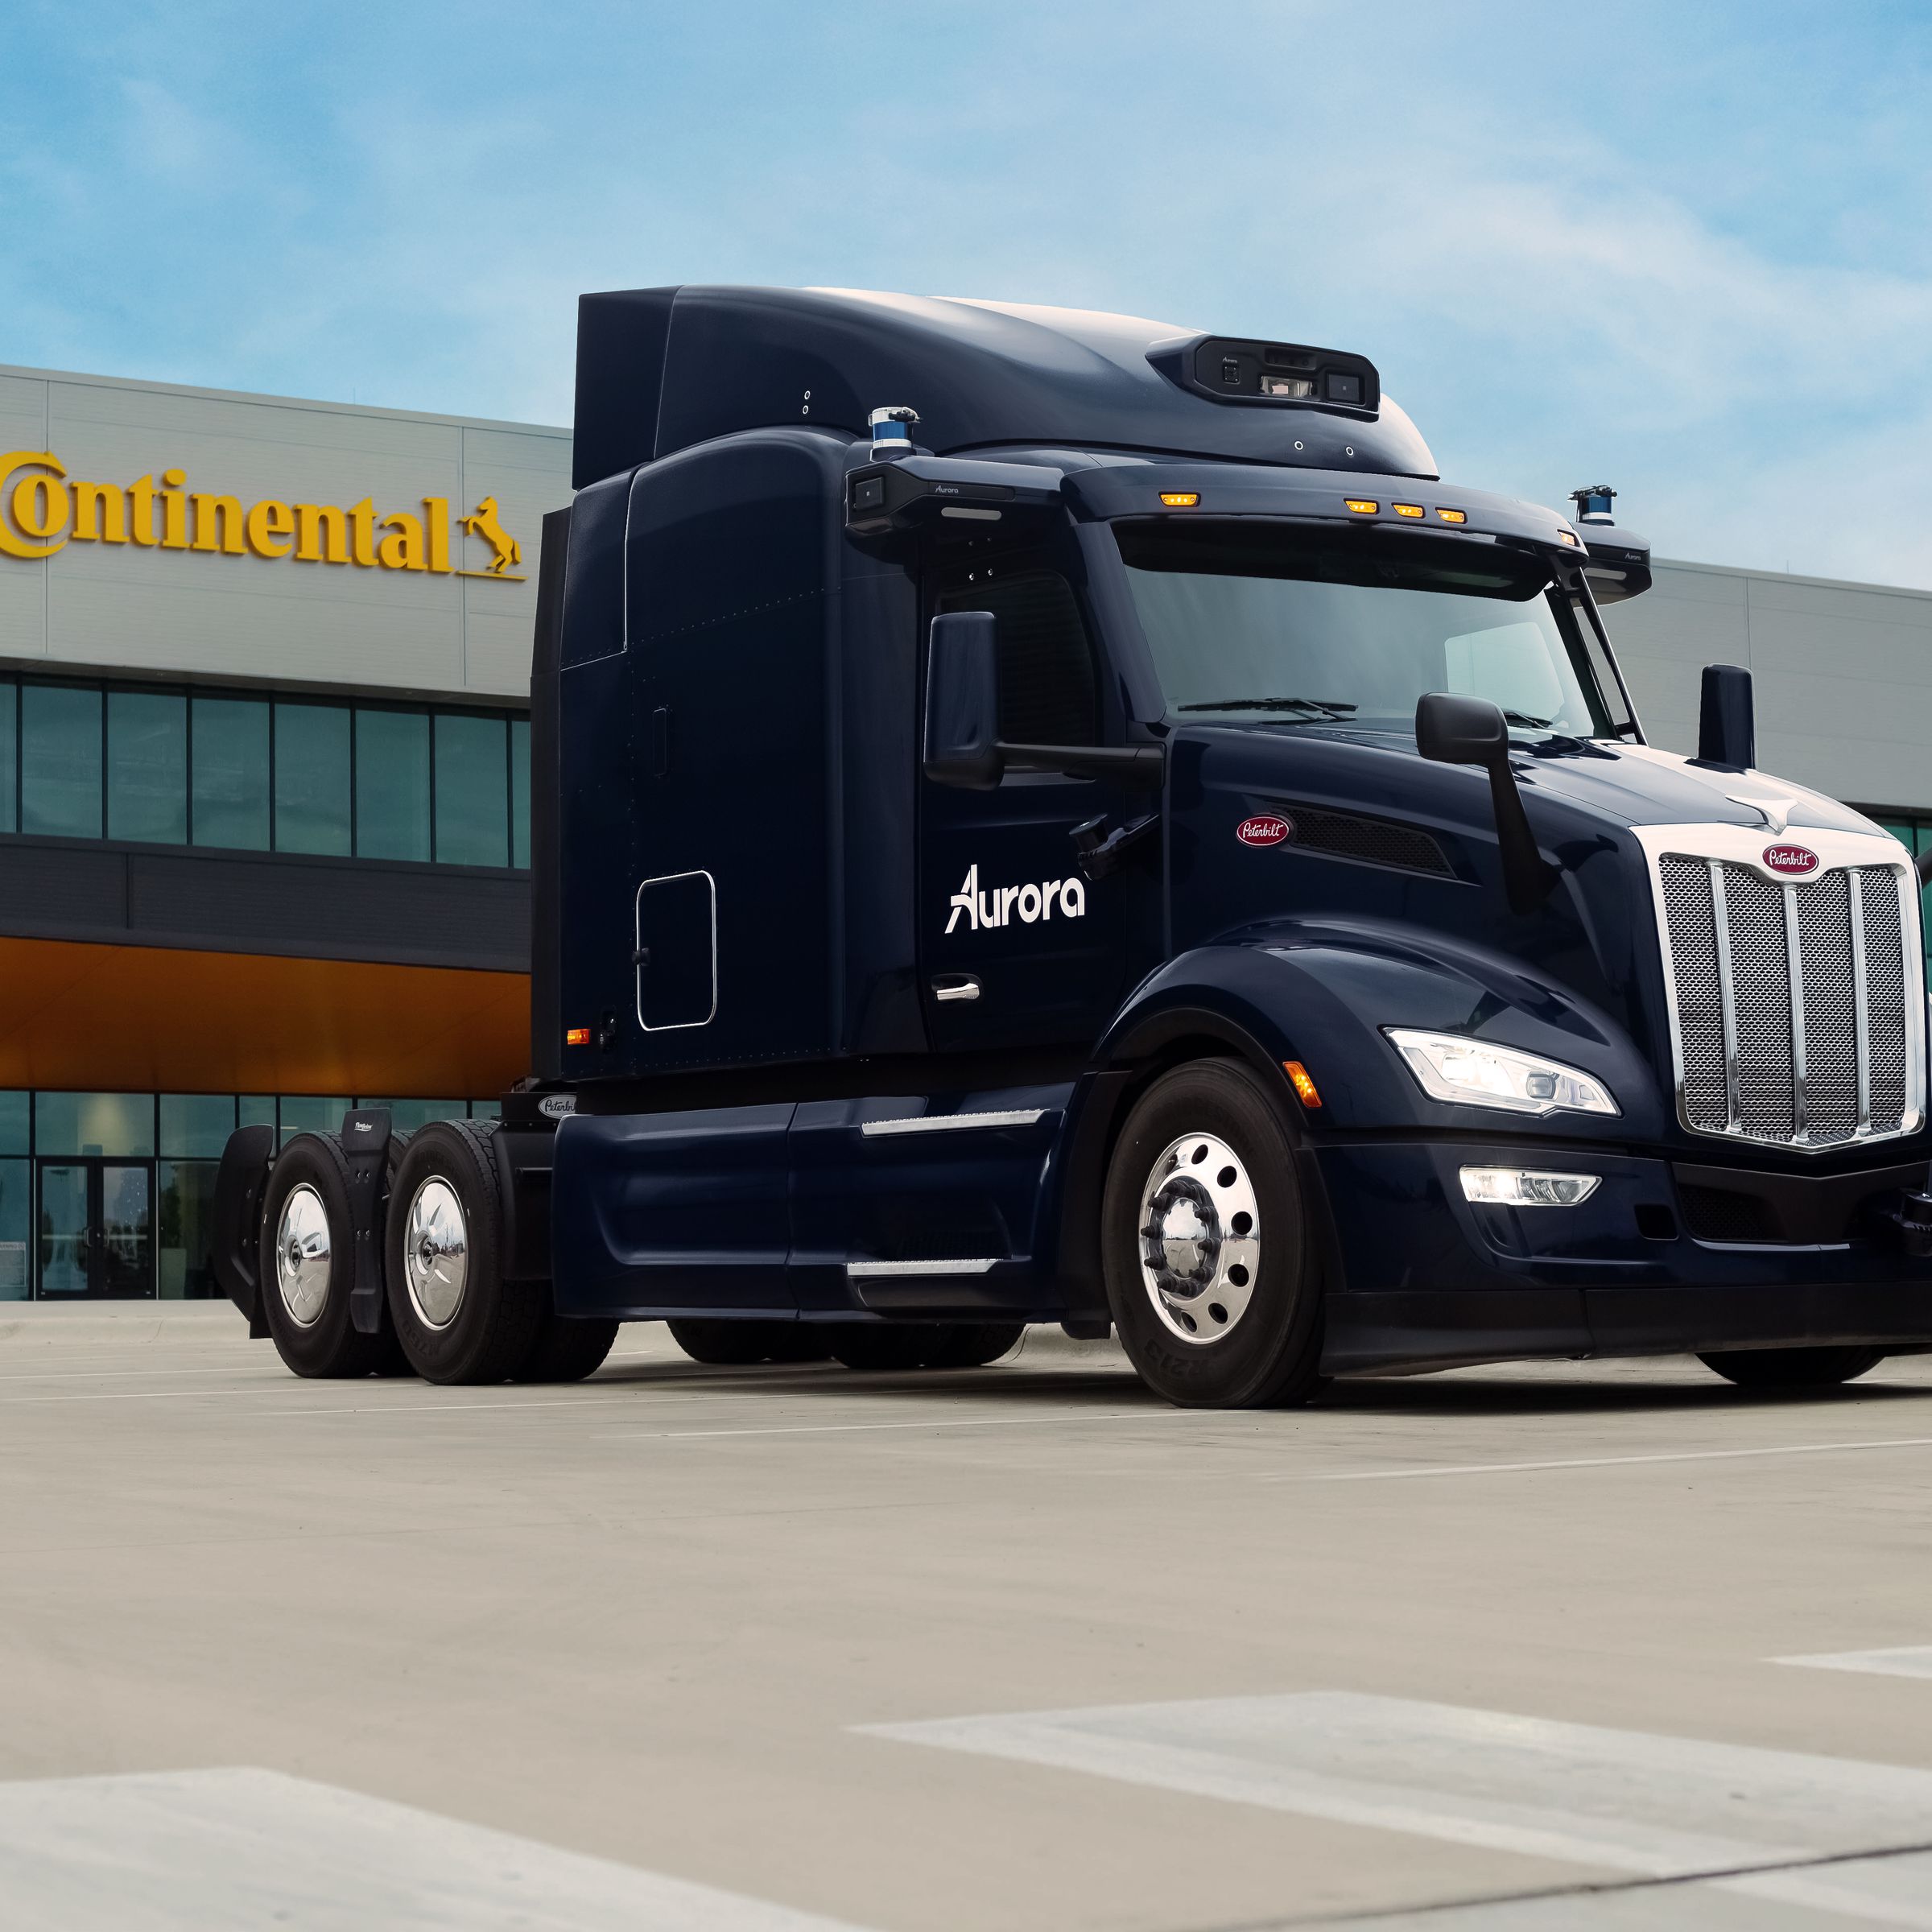 Aurora and Continental self-driving truck